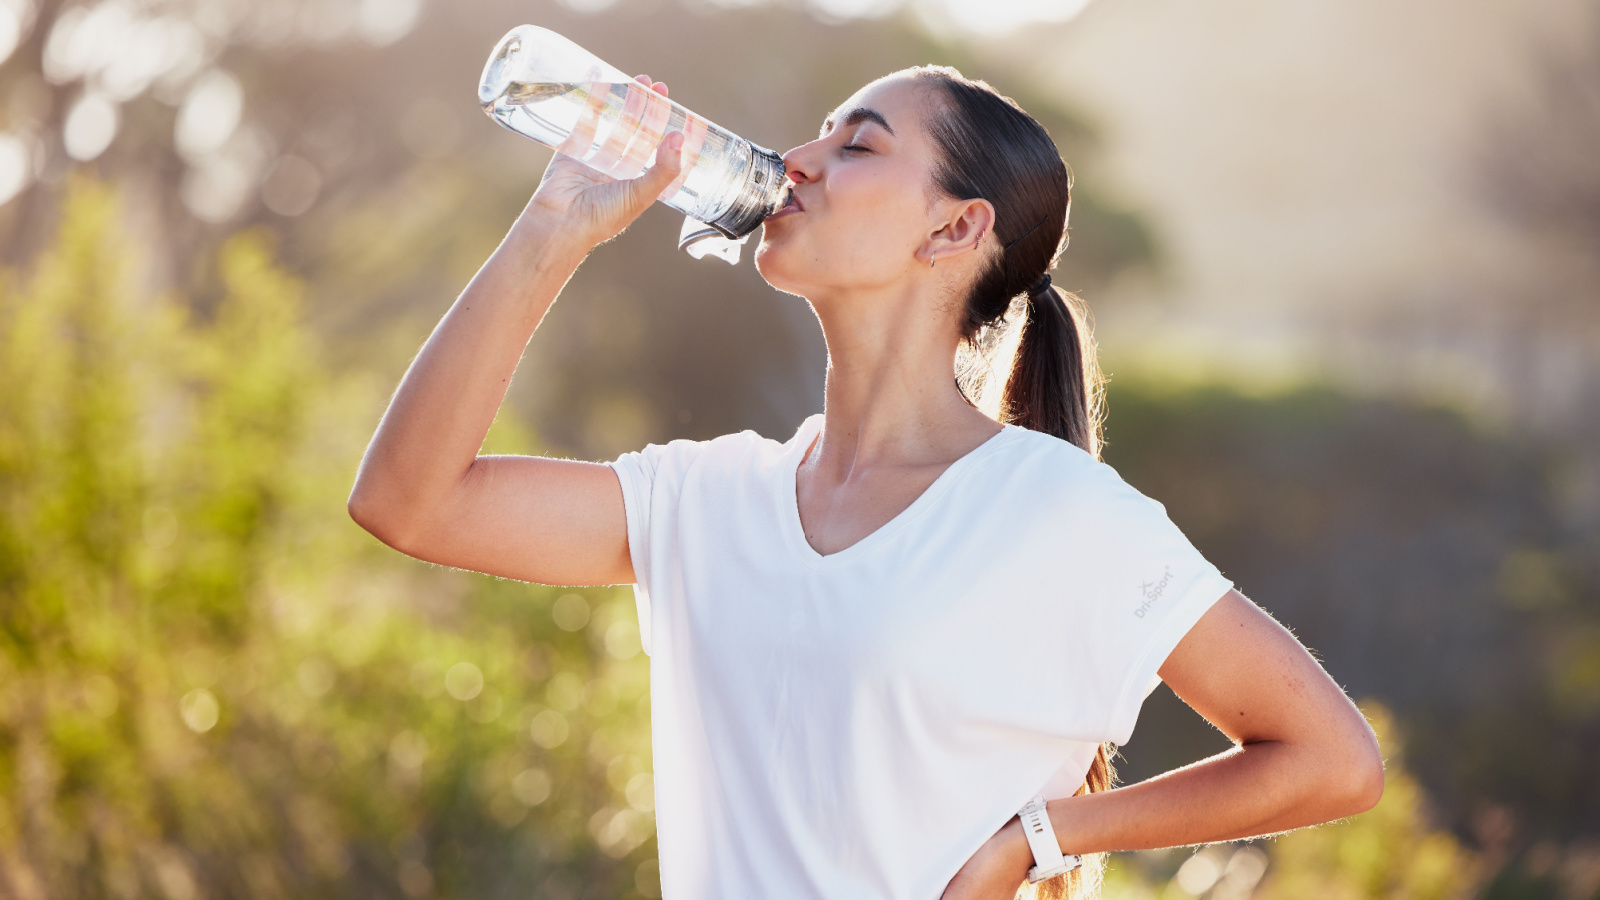 image credit: PeopleImages.com-Yuri-A/Shutterstock <p>Every time you go to refill your water bottle, take the longest route possible. This encourages you to drink more water while also increasing your step count. It’s a win-win for hydration and movement. You’ll be surprised how much extra walking you can fit into your day.</p>